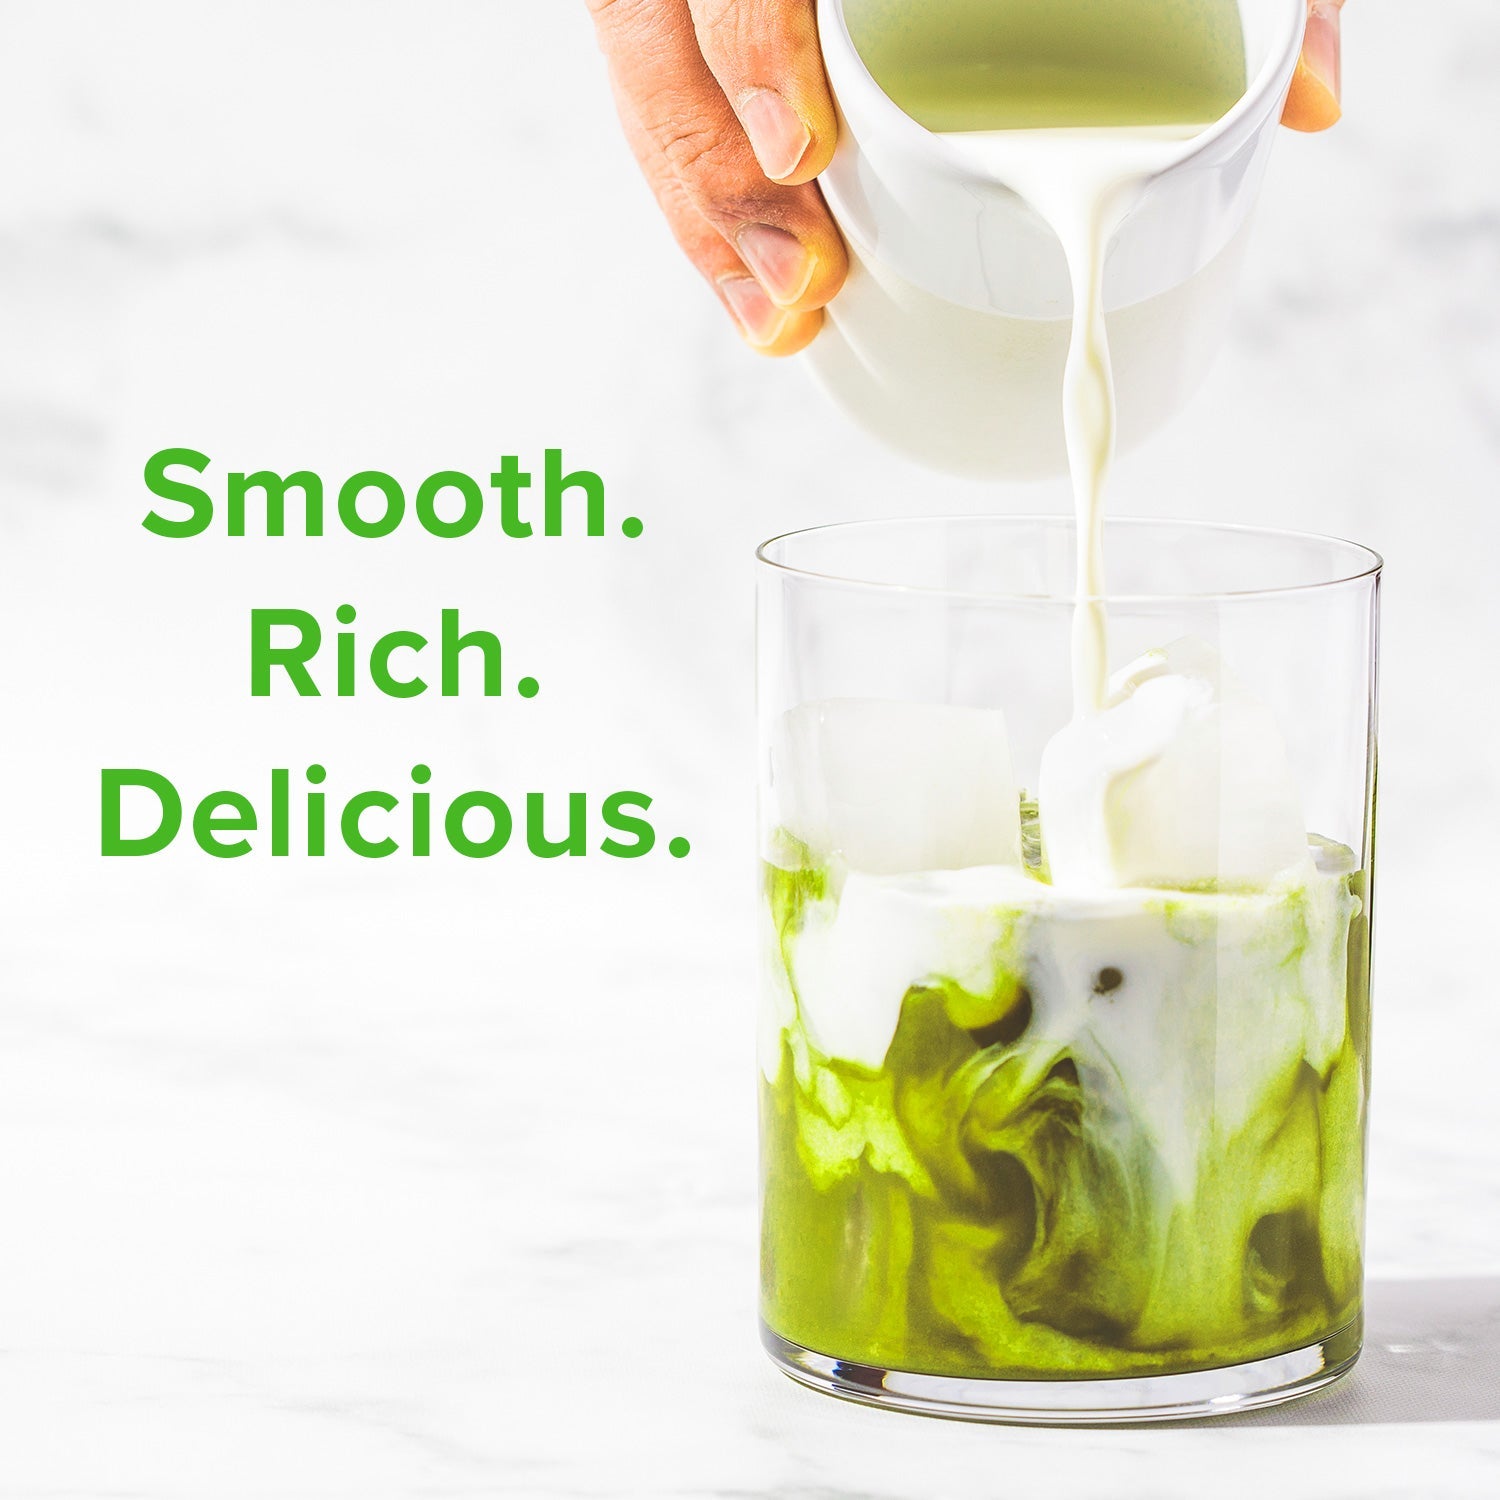 Taste the smooth, rich, delicious flavor of Further Food's Matcha Collagen.